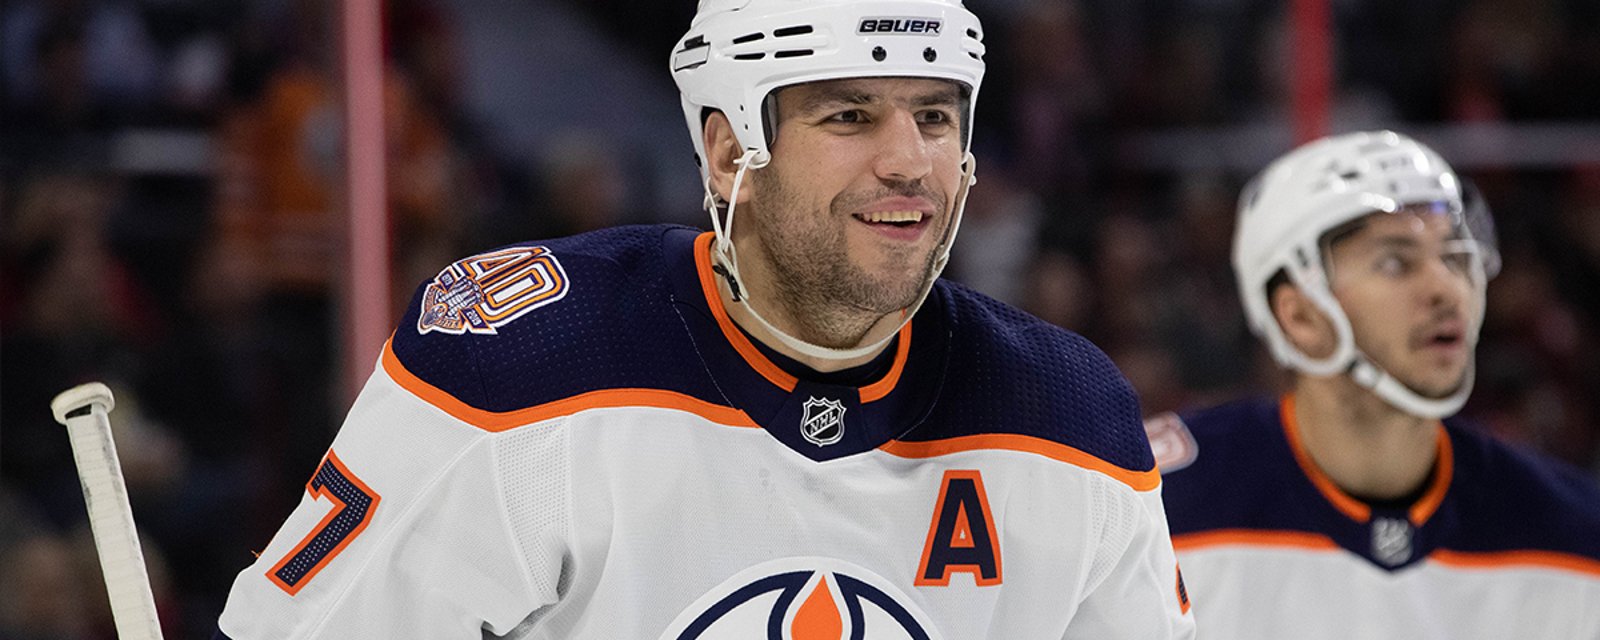 Lucic openly talks about leaving the Oilers and joining another NHL team